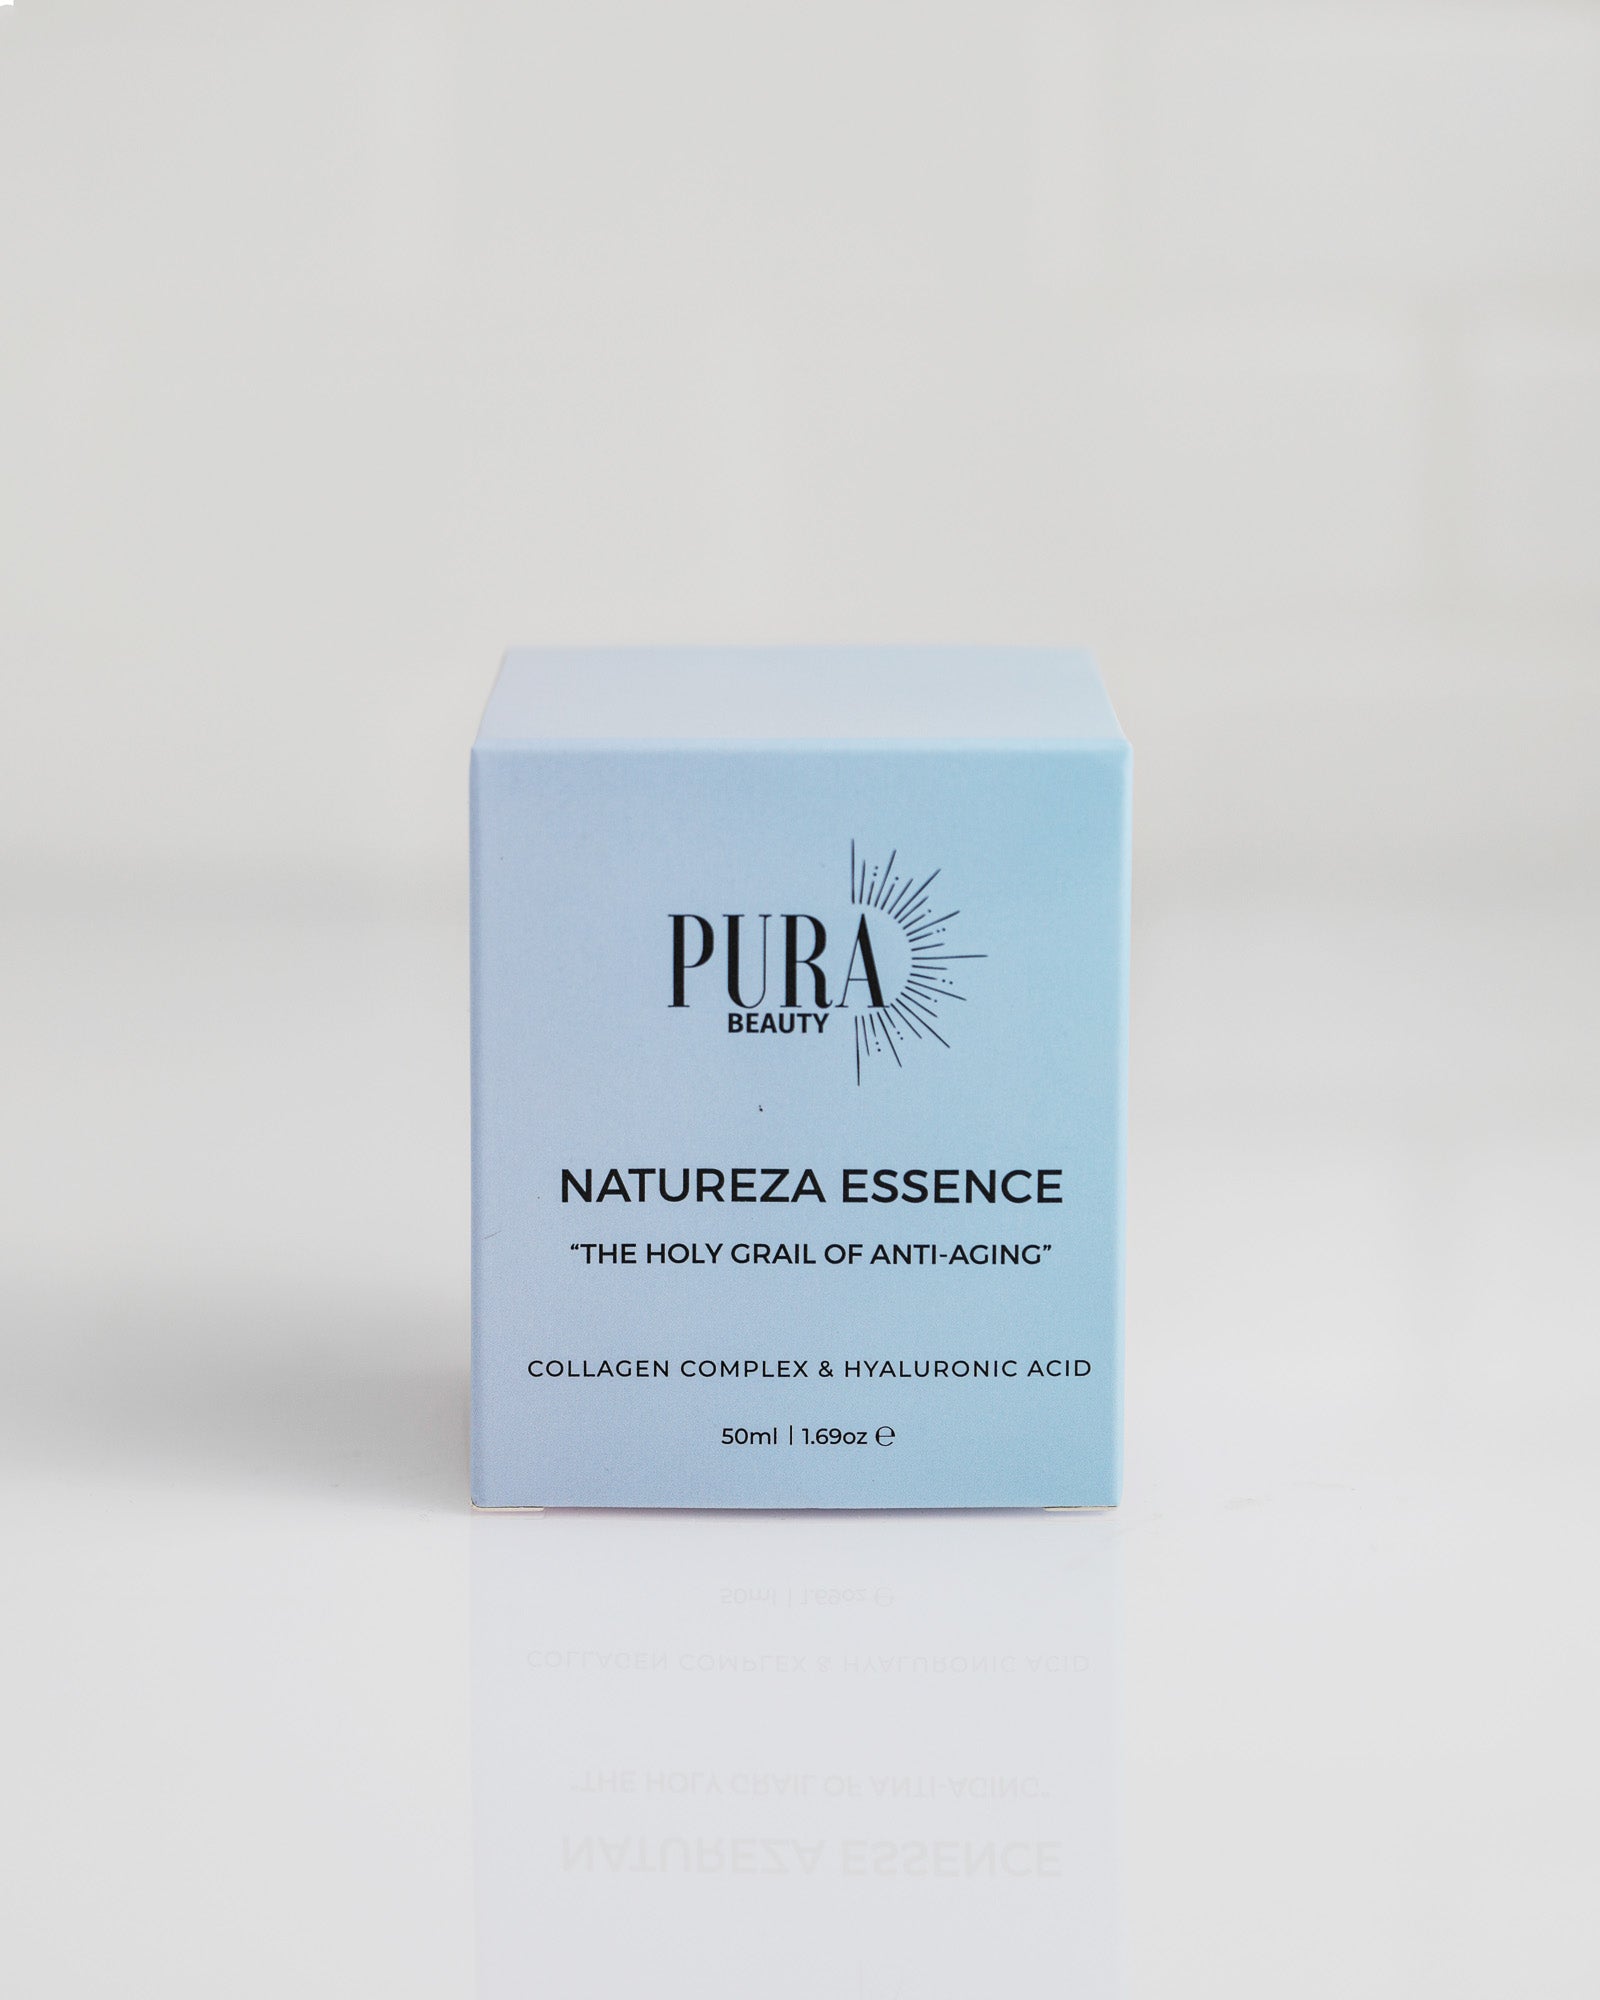 Natureza Essence - The Holy Grail of Anti-Aging